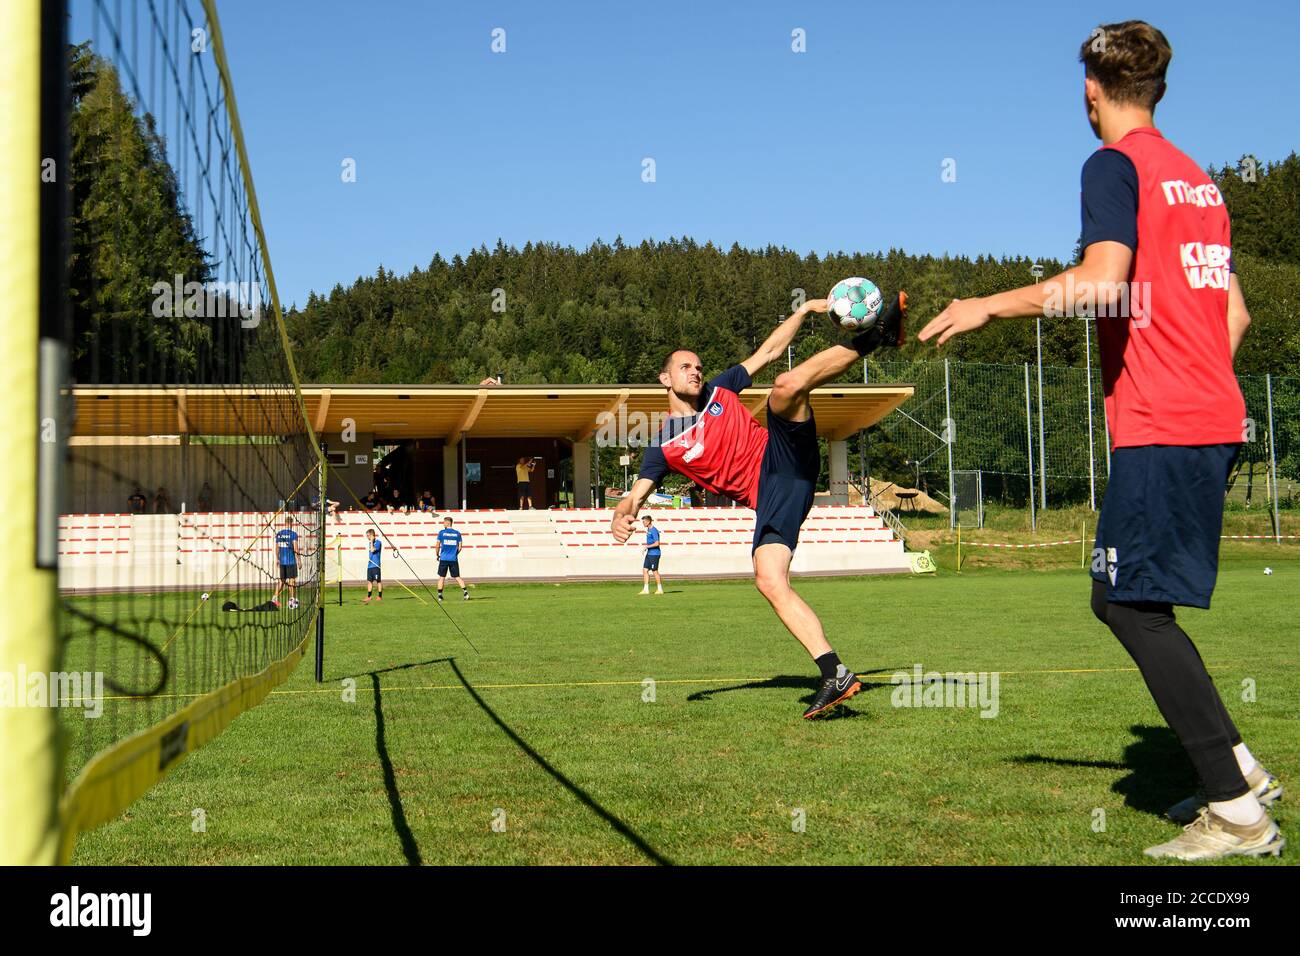 goalwart Marius Gersbeck (KSC) on the ball. The training session on afterwithtag takes place on a square in Vorderweissach, where the KSC plays football tennis for a change. GES/Football/2. Bundesliga: Karlsruher SC - training camp, August 21, 2020 Football/Soccer: 2. Bundesliga: KSC training camp, Bad Leonfelden, Austria, August 21, 2020 | usage worldwide Stock Photo